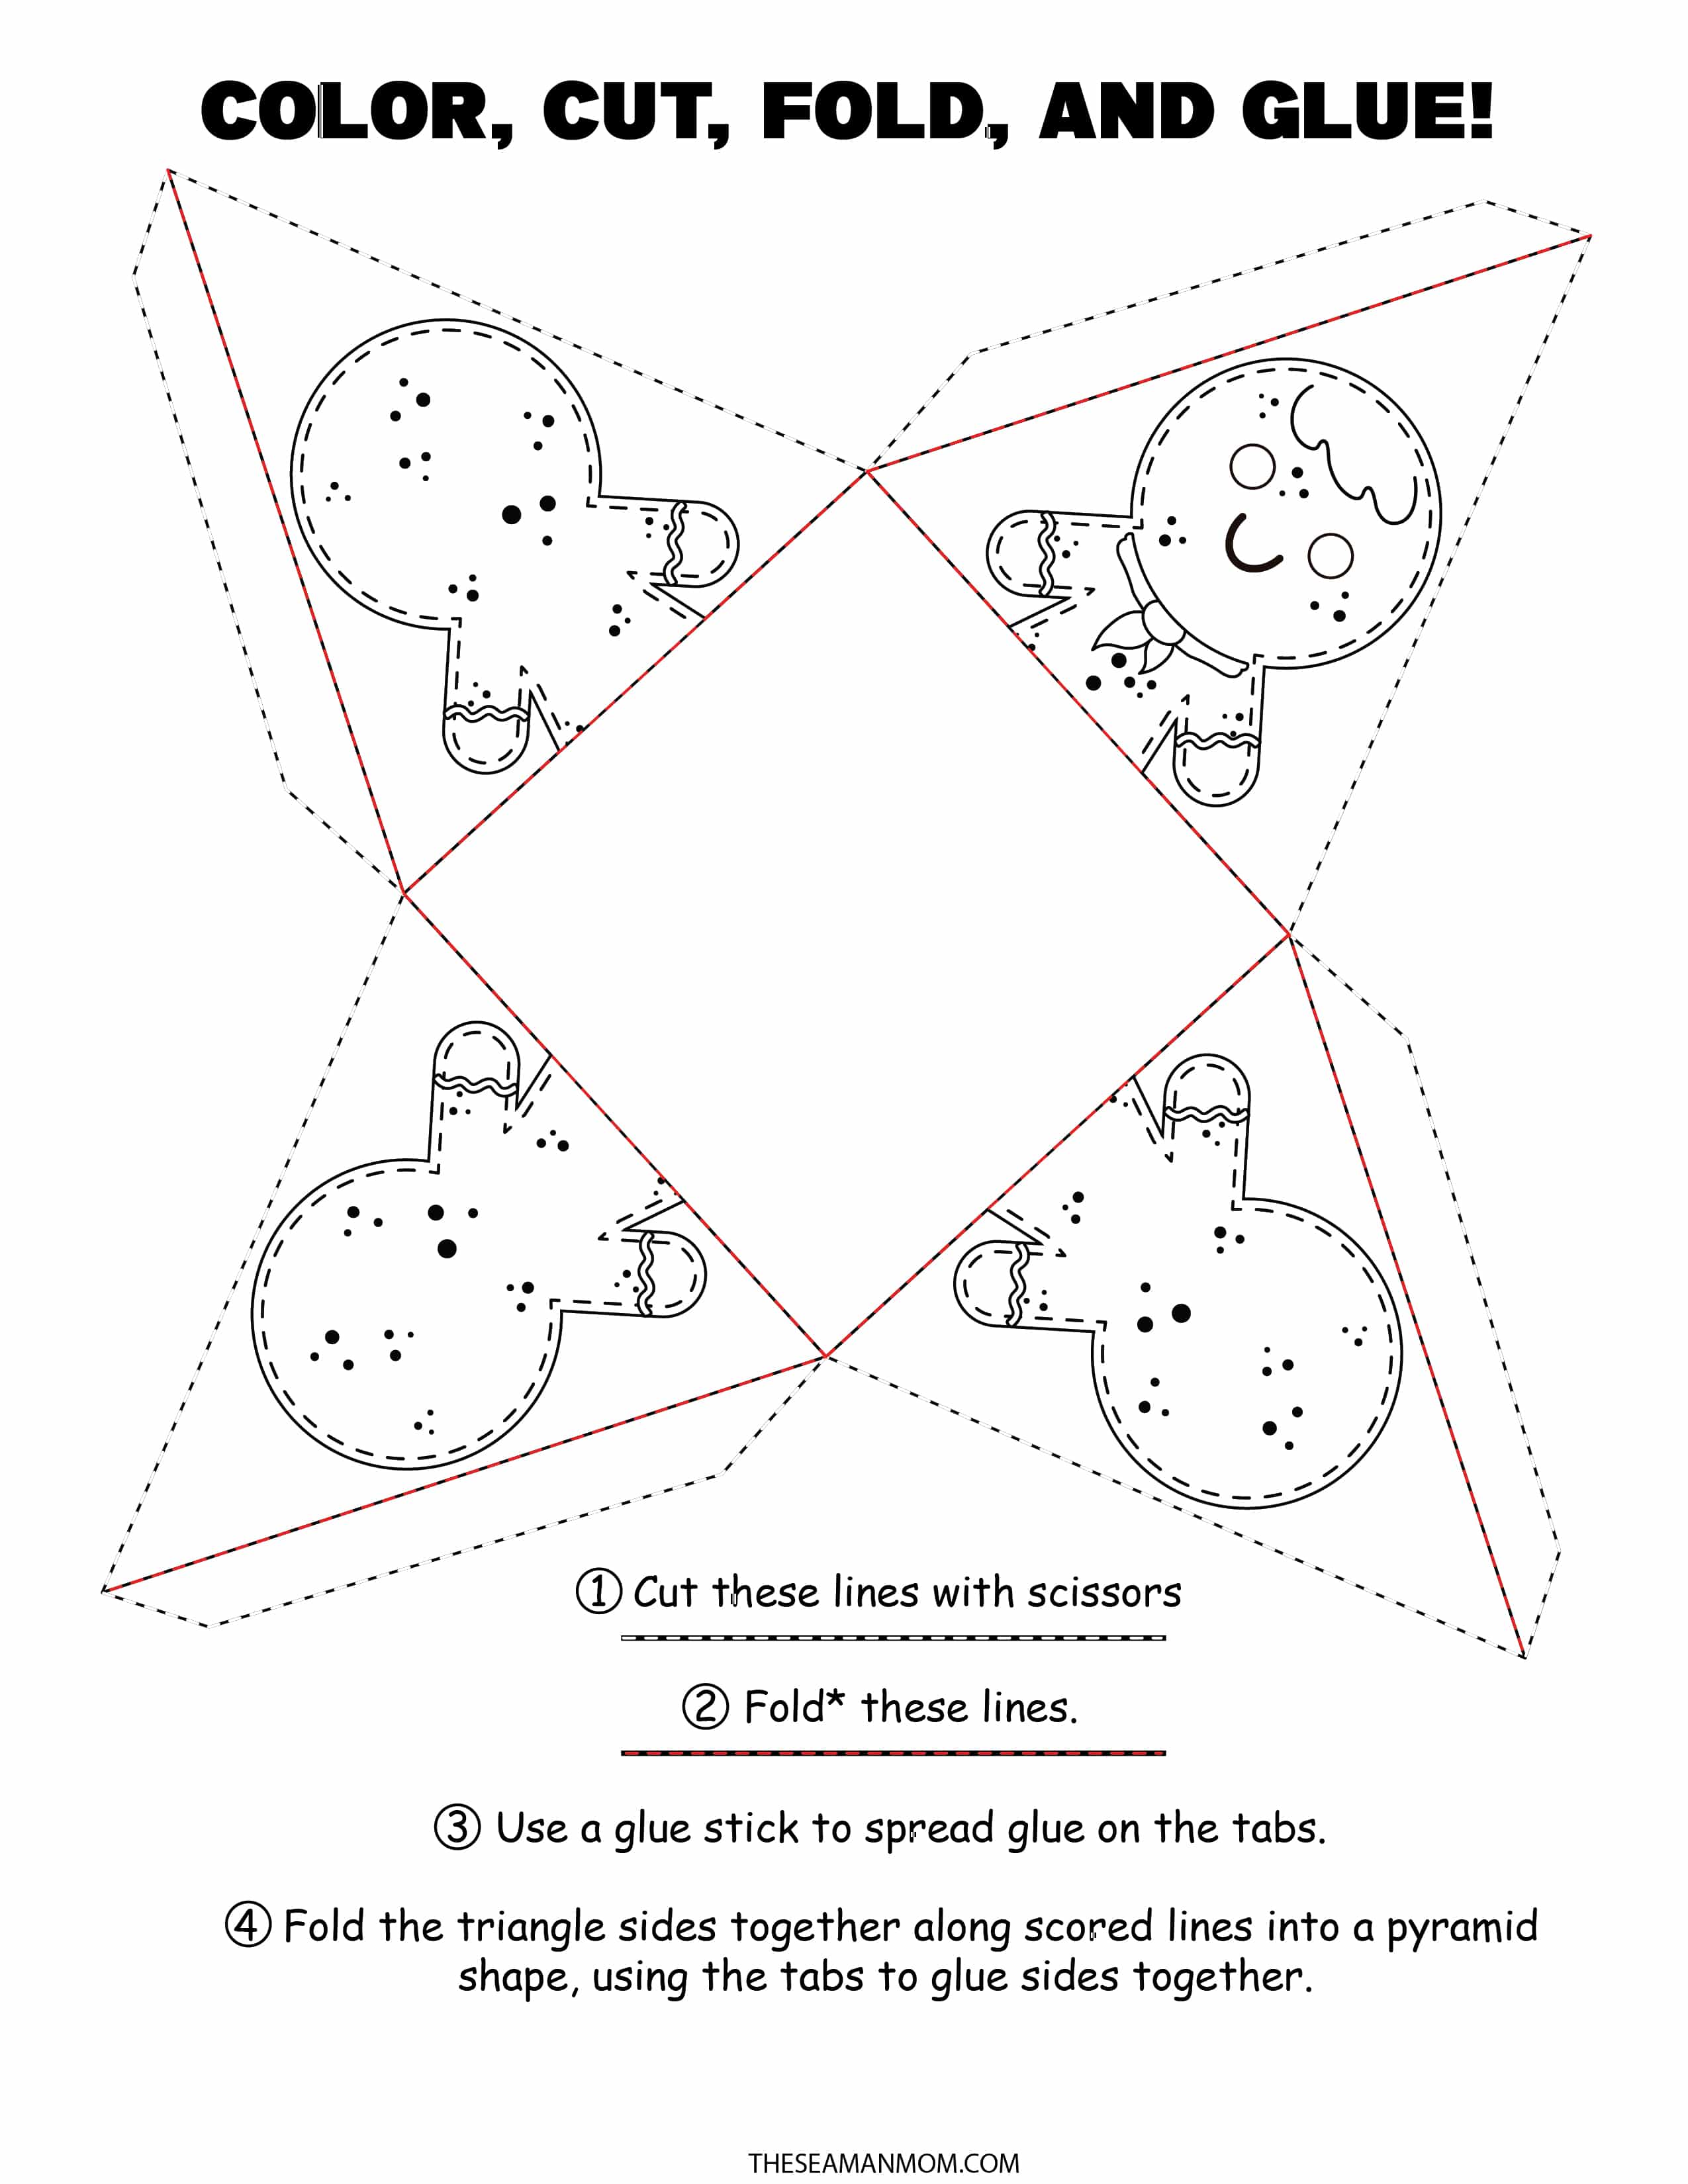 Printable gingerbread man ornaments to color, cut, fold and glue and make your own tree ornaments